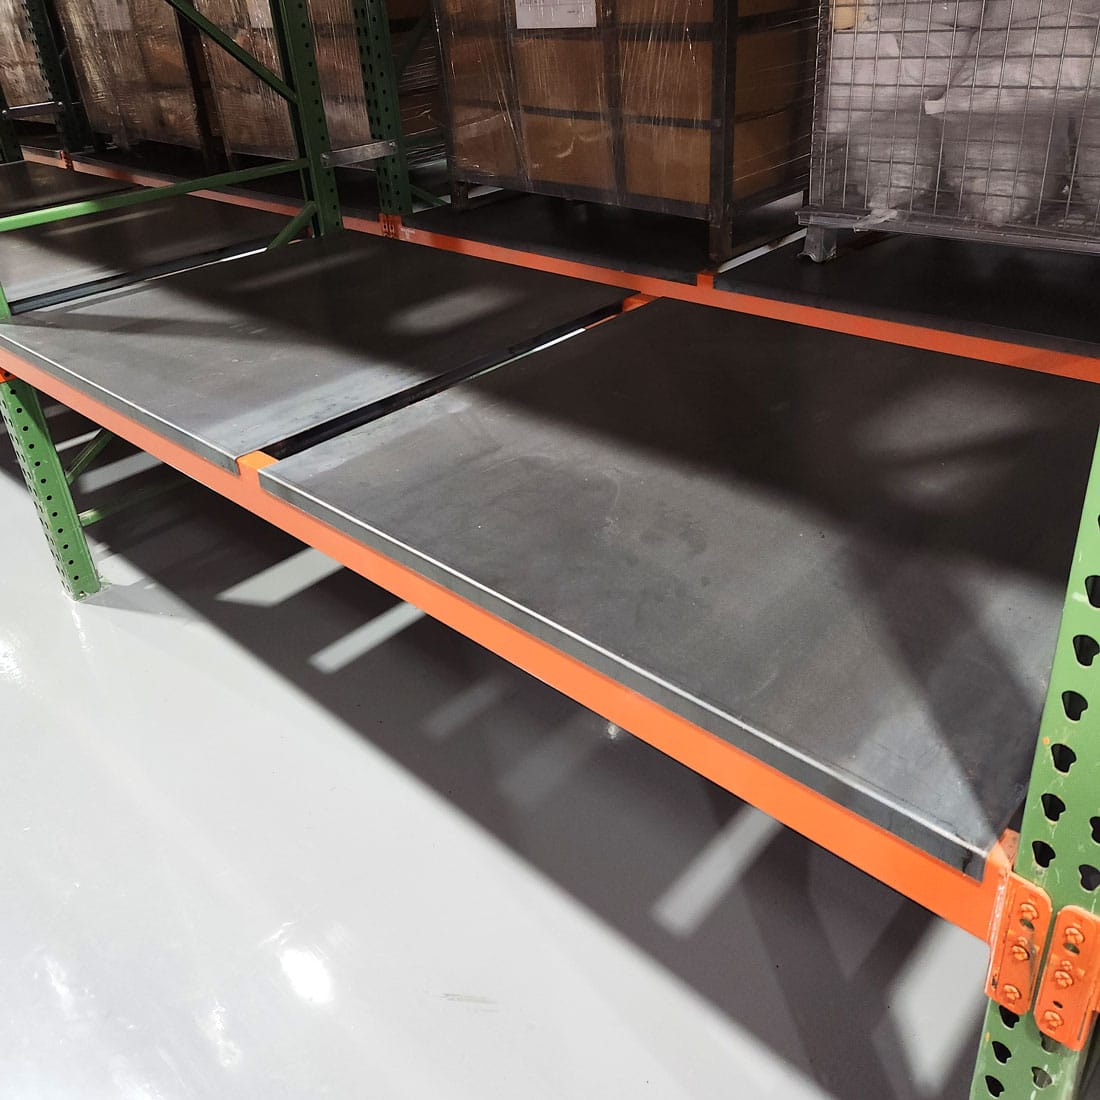 Pallet Rack Shelving | Solid Pallet Rack Decking | Custom Metal Fabricators | MFS | Metal Fabrication Services | a Division of Eberl Iron Works, Inc. | Buffalo, NY USA